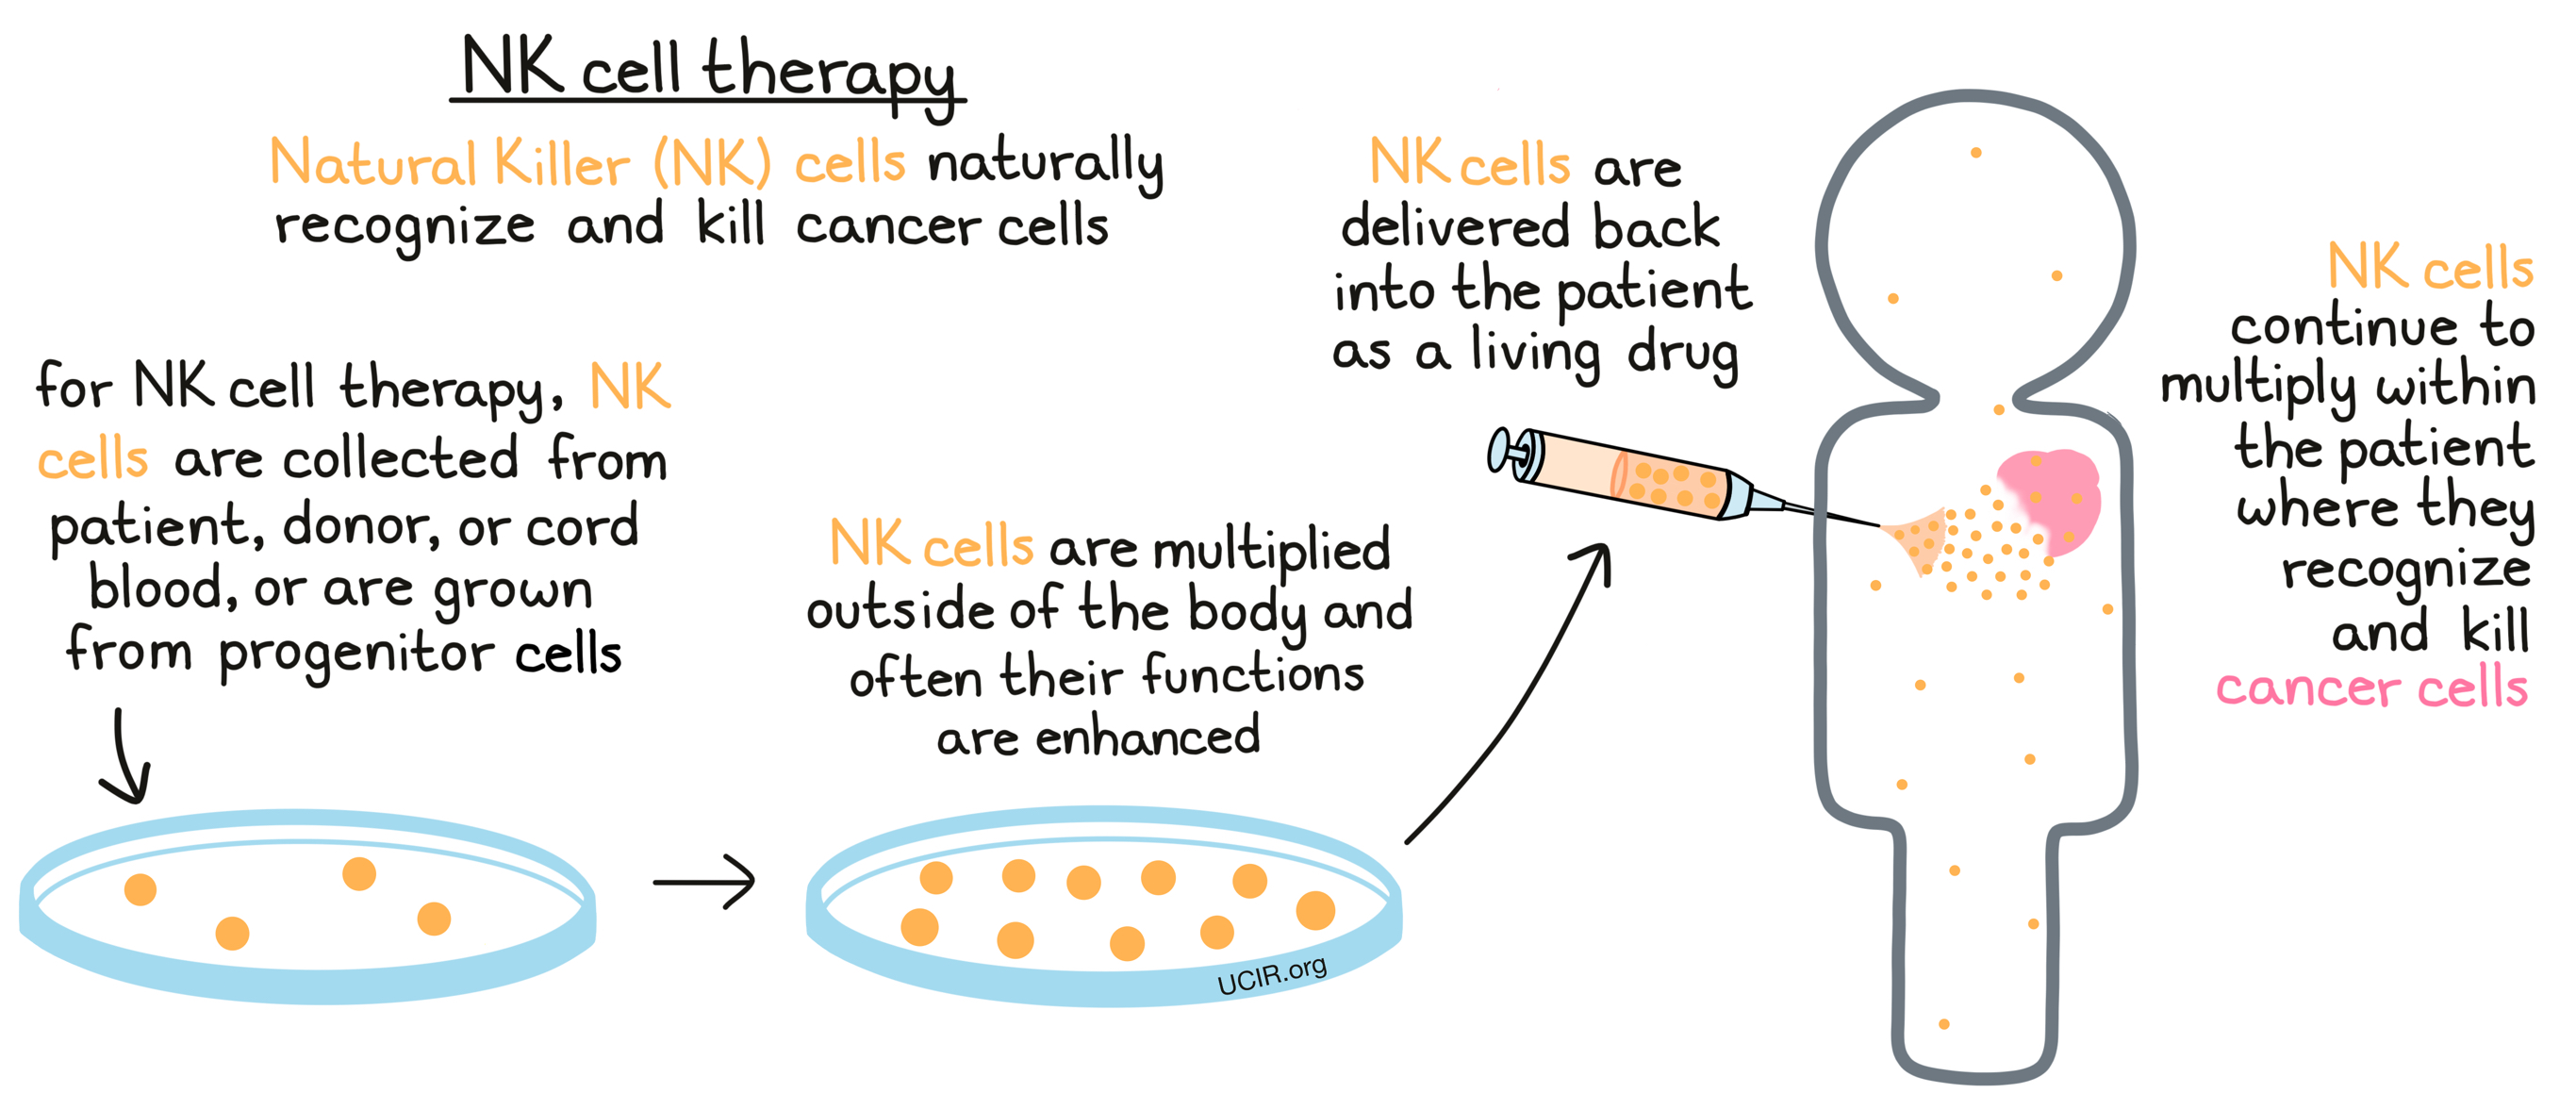 Illustration showing how NK cell therapy works